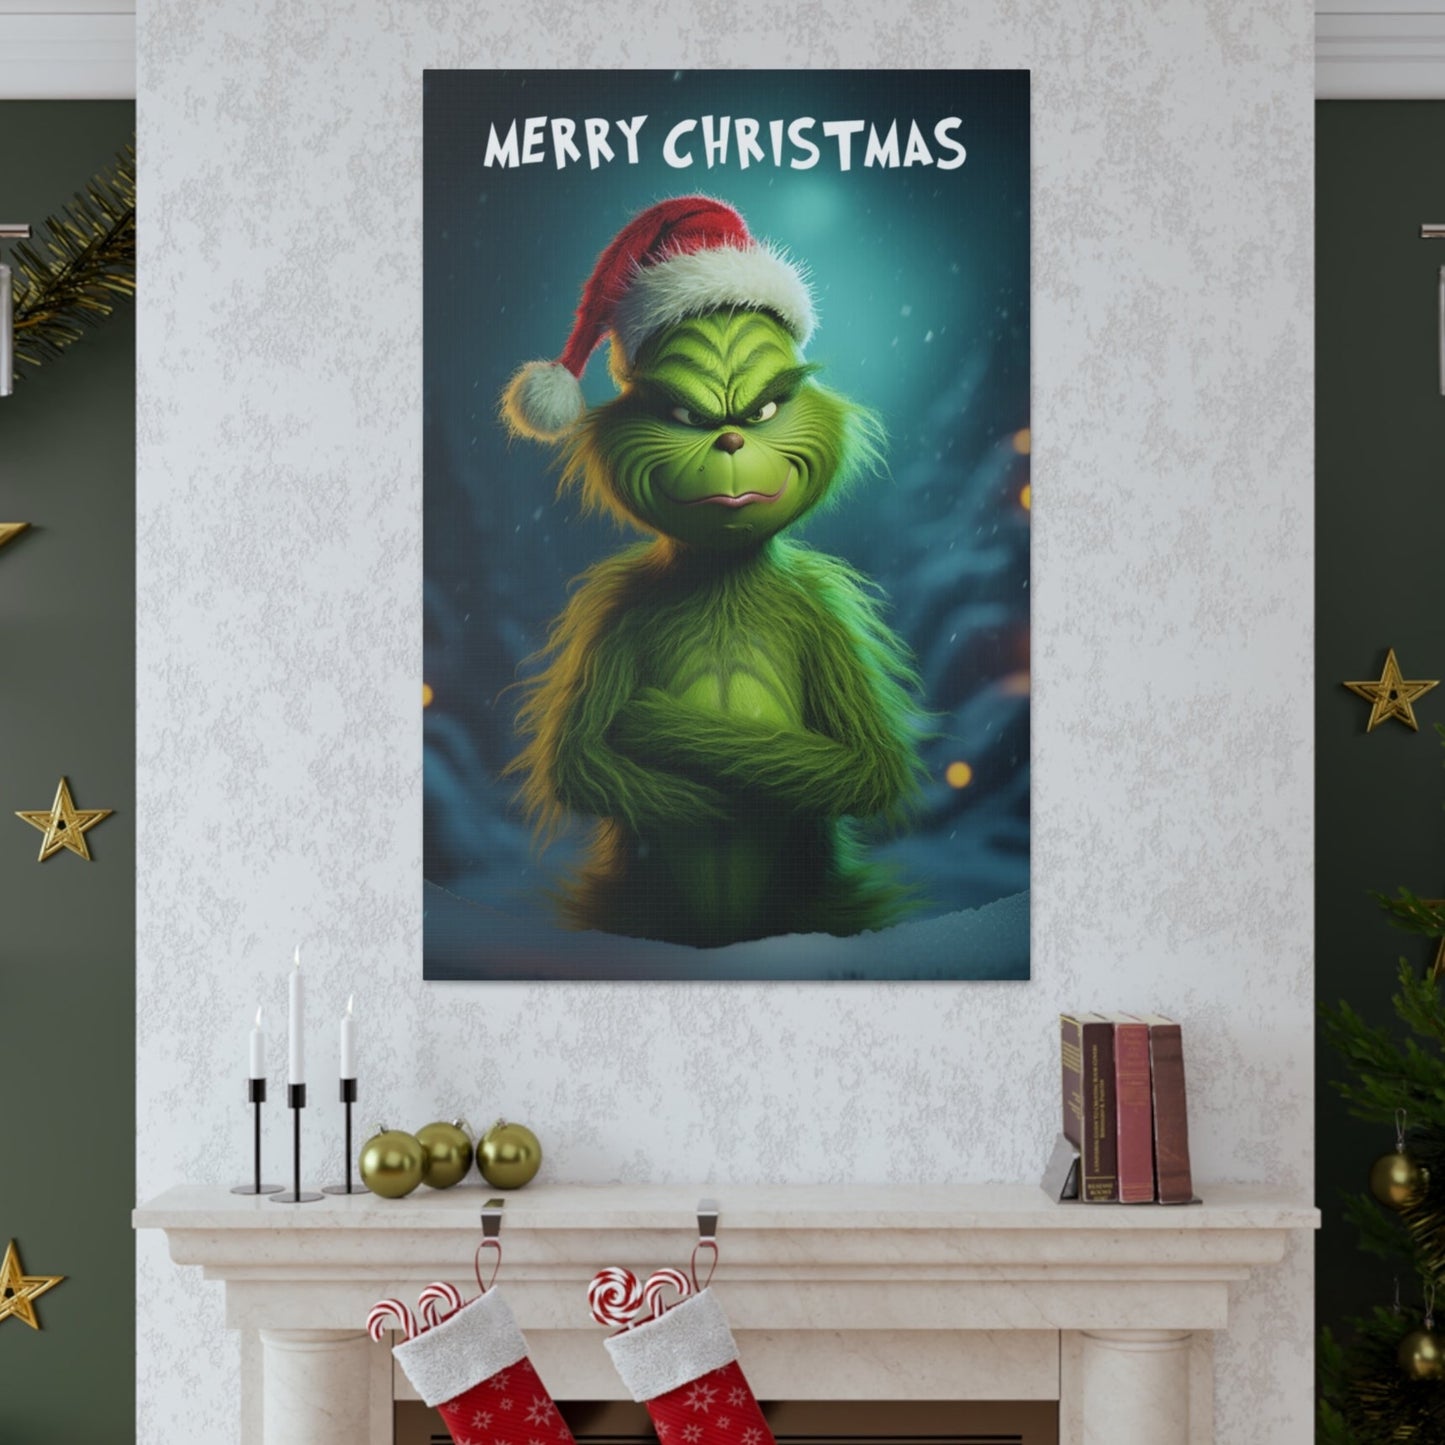 The Grinch Christmas decorations